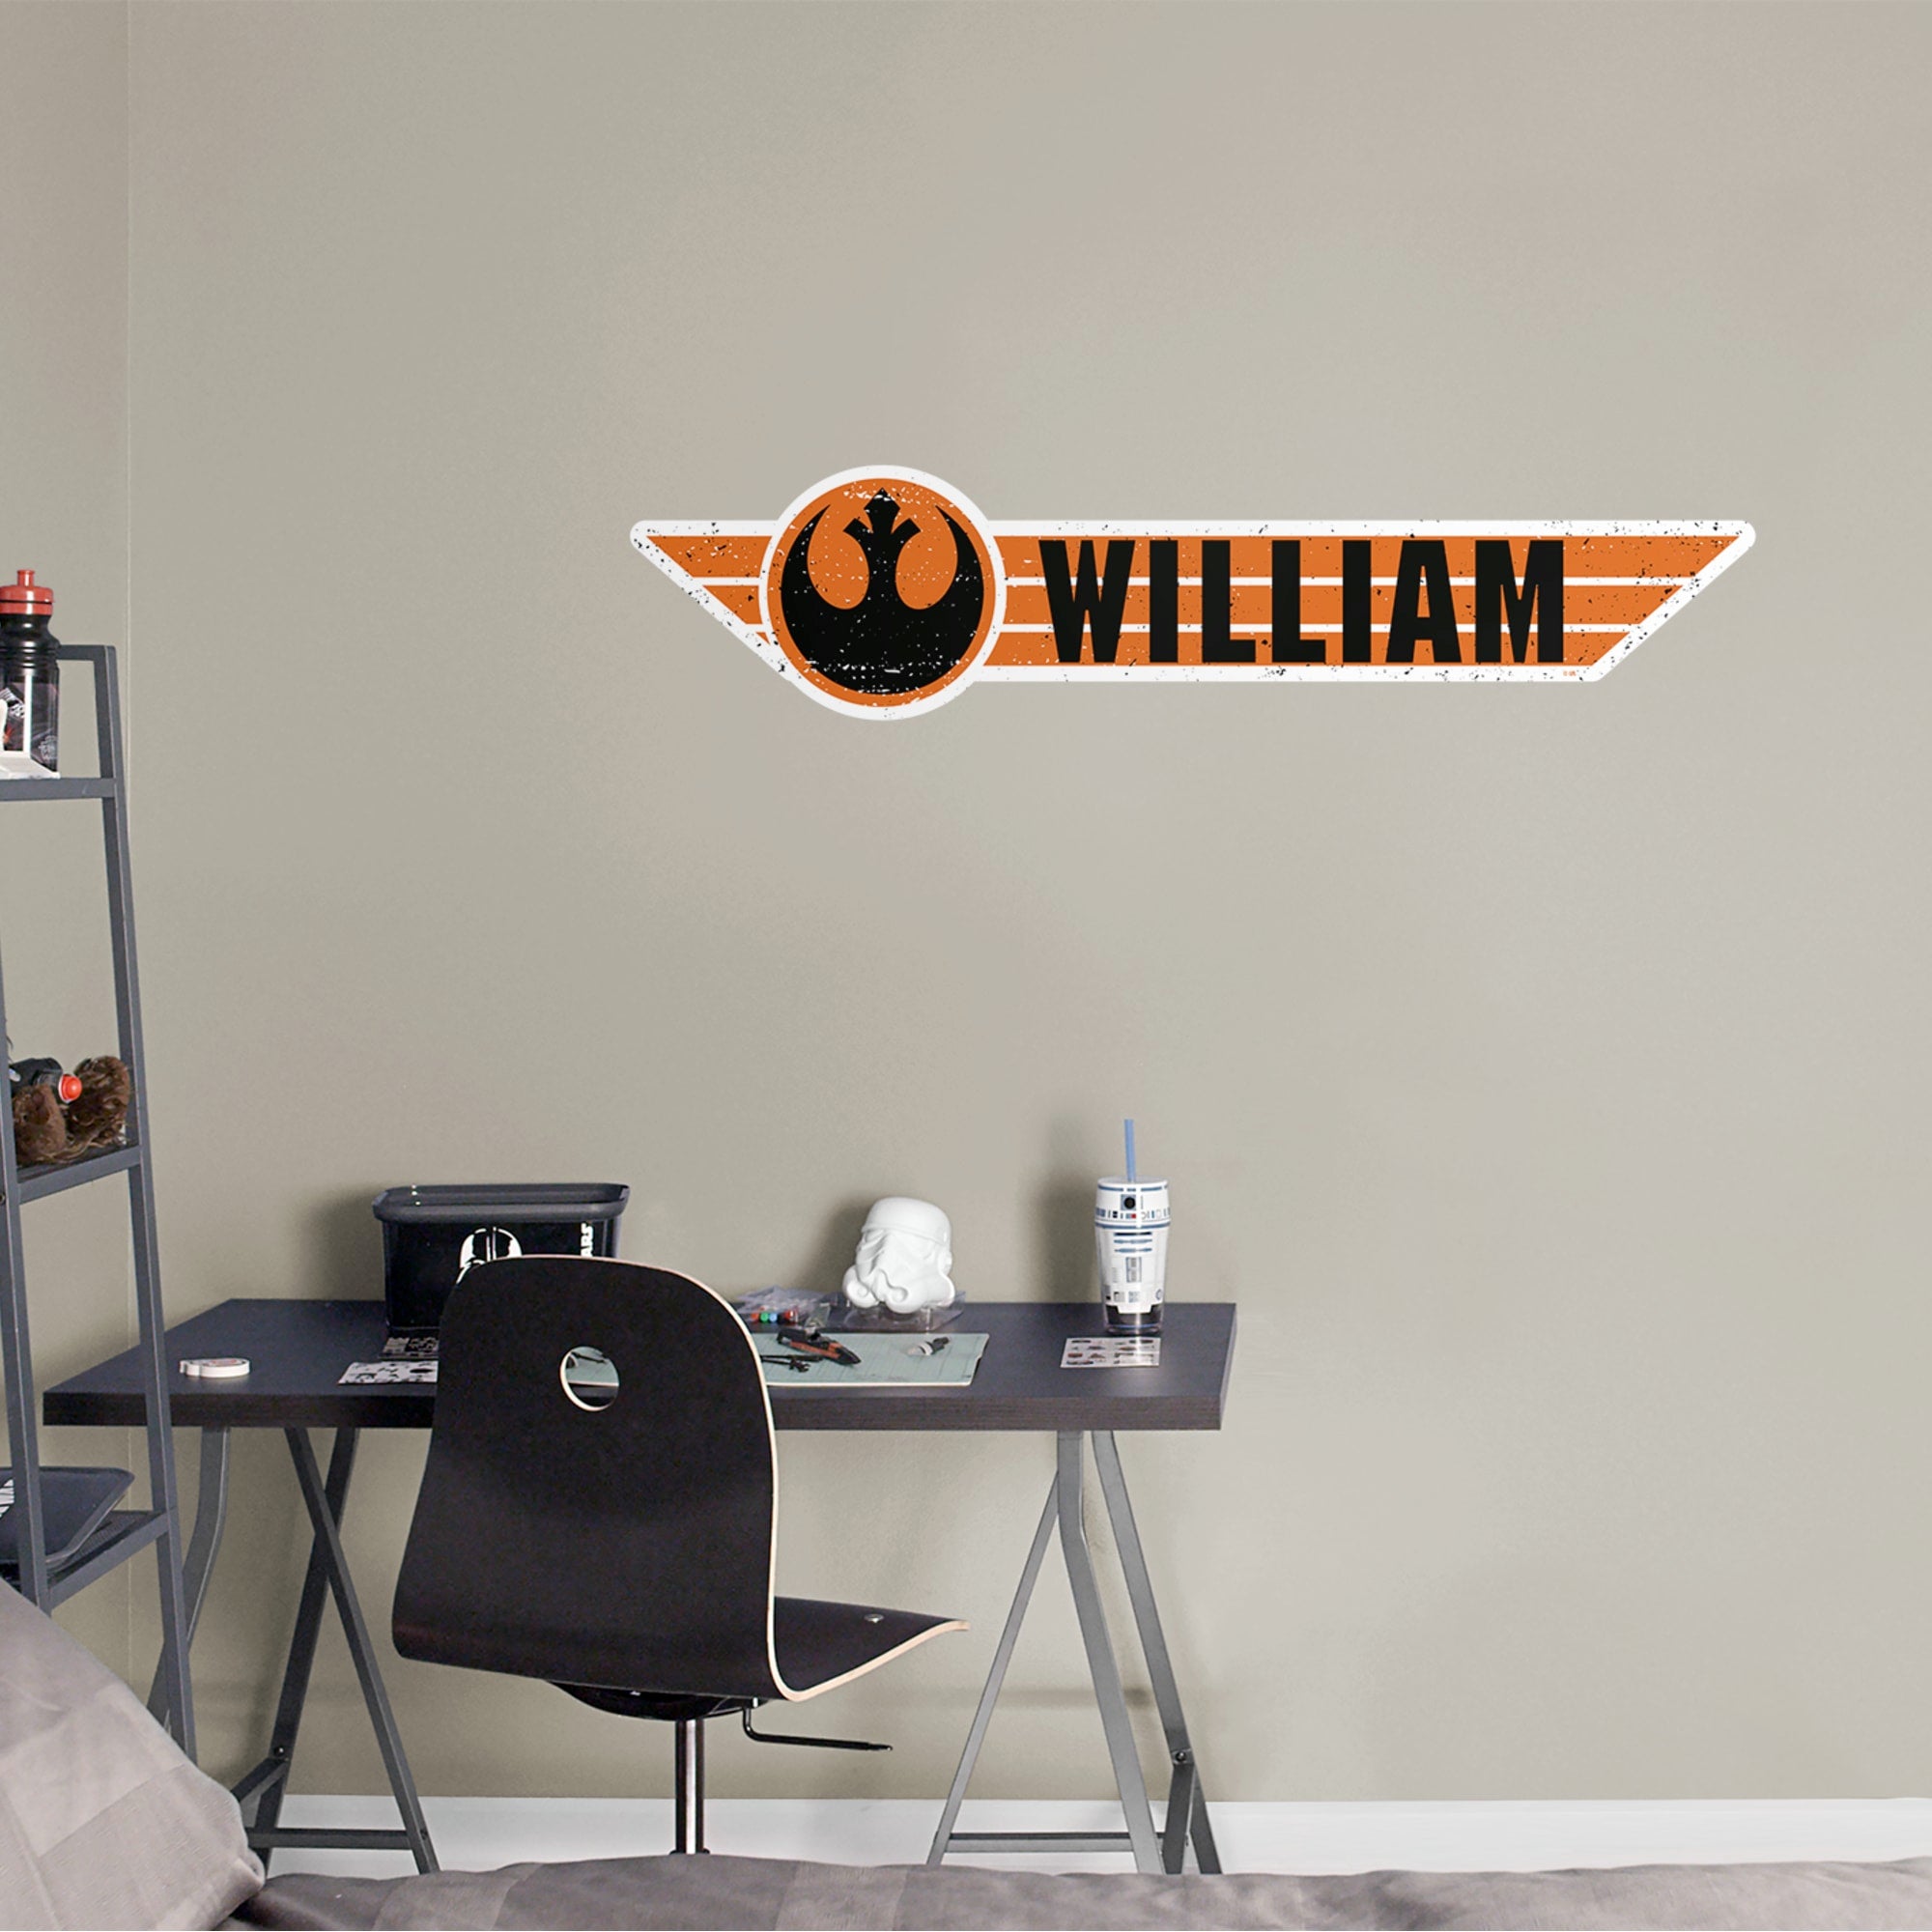 Resistance Personalized Name - Removable Transfer Decal 50.0"W x 11.0"H by Fathead | Vinyl